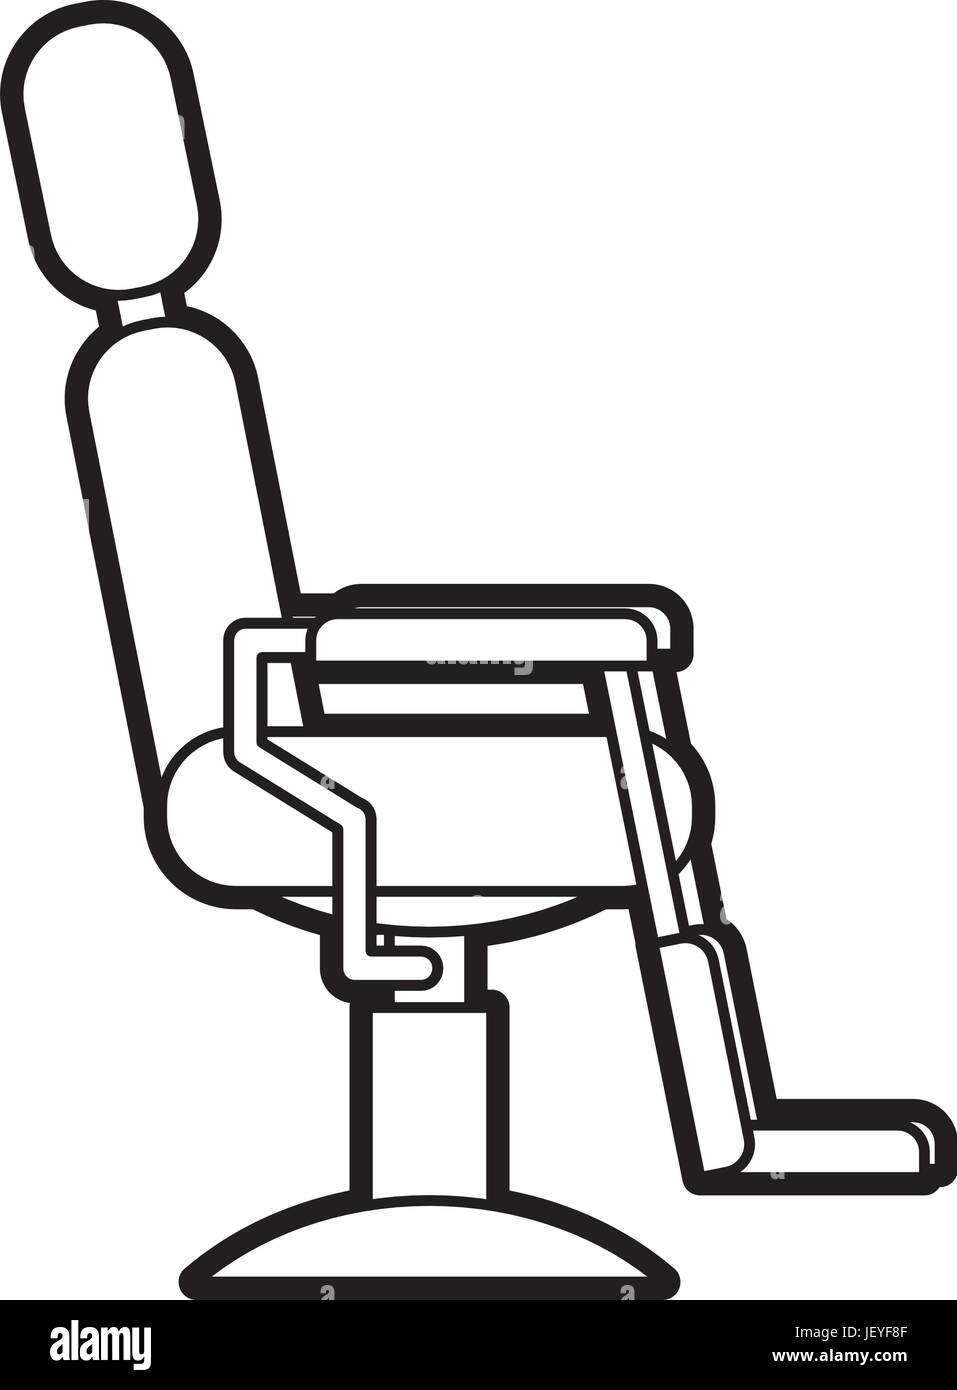 Barber Chair Drawing Stock Photos & Barber Chair Drawing